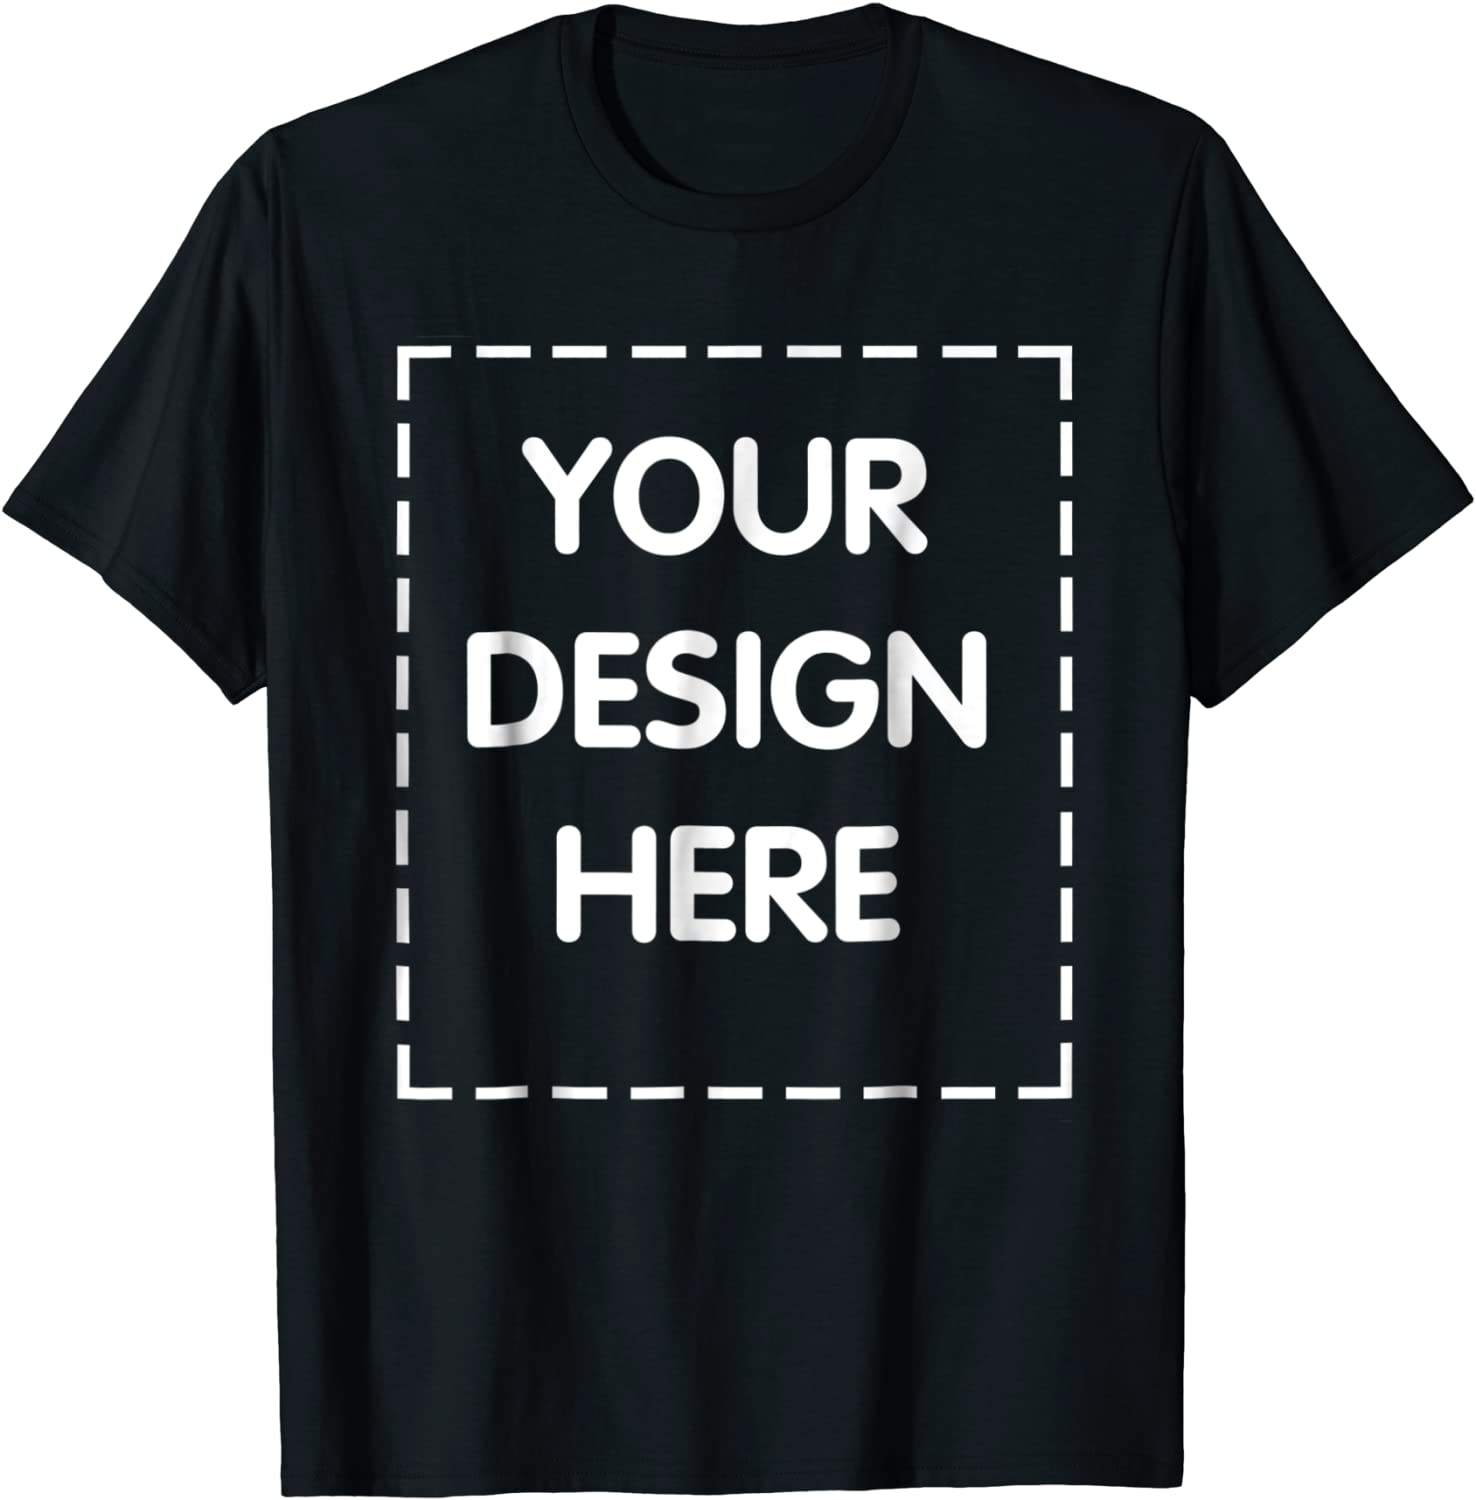 a t shirt that has your design here written on it